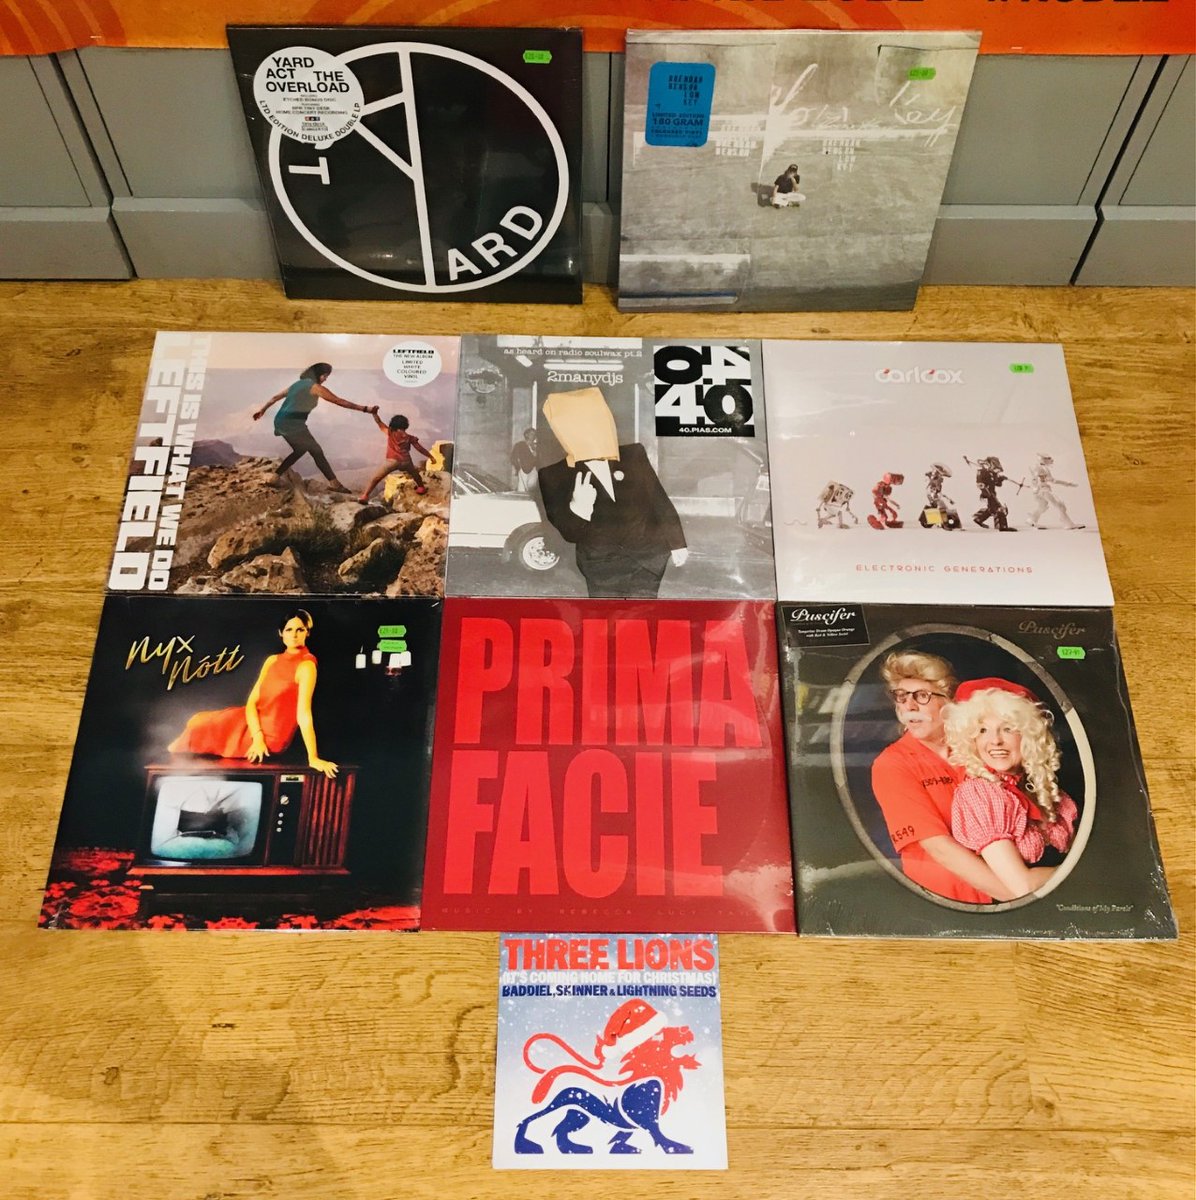 #NewMusicFriday New albums from @Leftfield, @brendanbensongs, Nyx Nótt (@AidanJohnMoffat), @carl_cox, plus expanded @YardActBand, @SELFESTEEM___'s 'Prima Facie' soundtrack and the new World Cup anthem from @Baddiel/ Skinner/@Lightning_Seeds and more #WaxUpdate